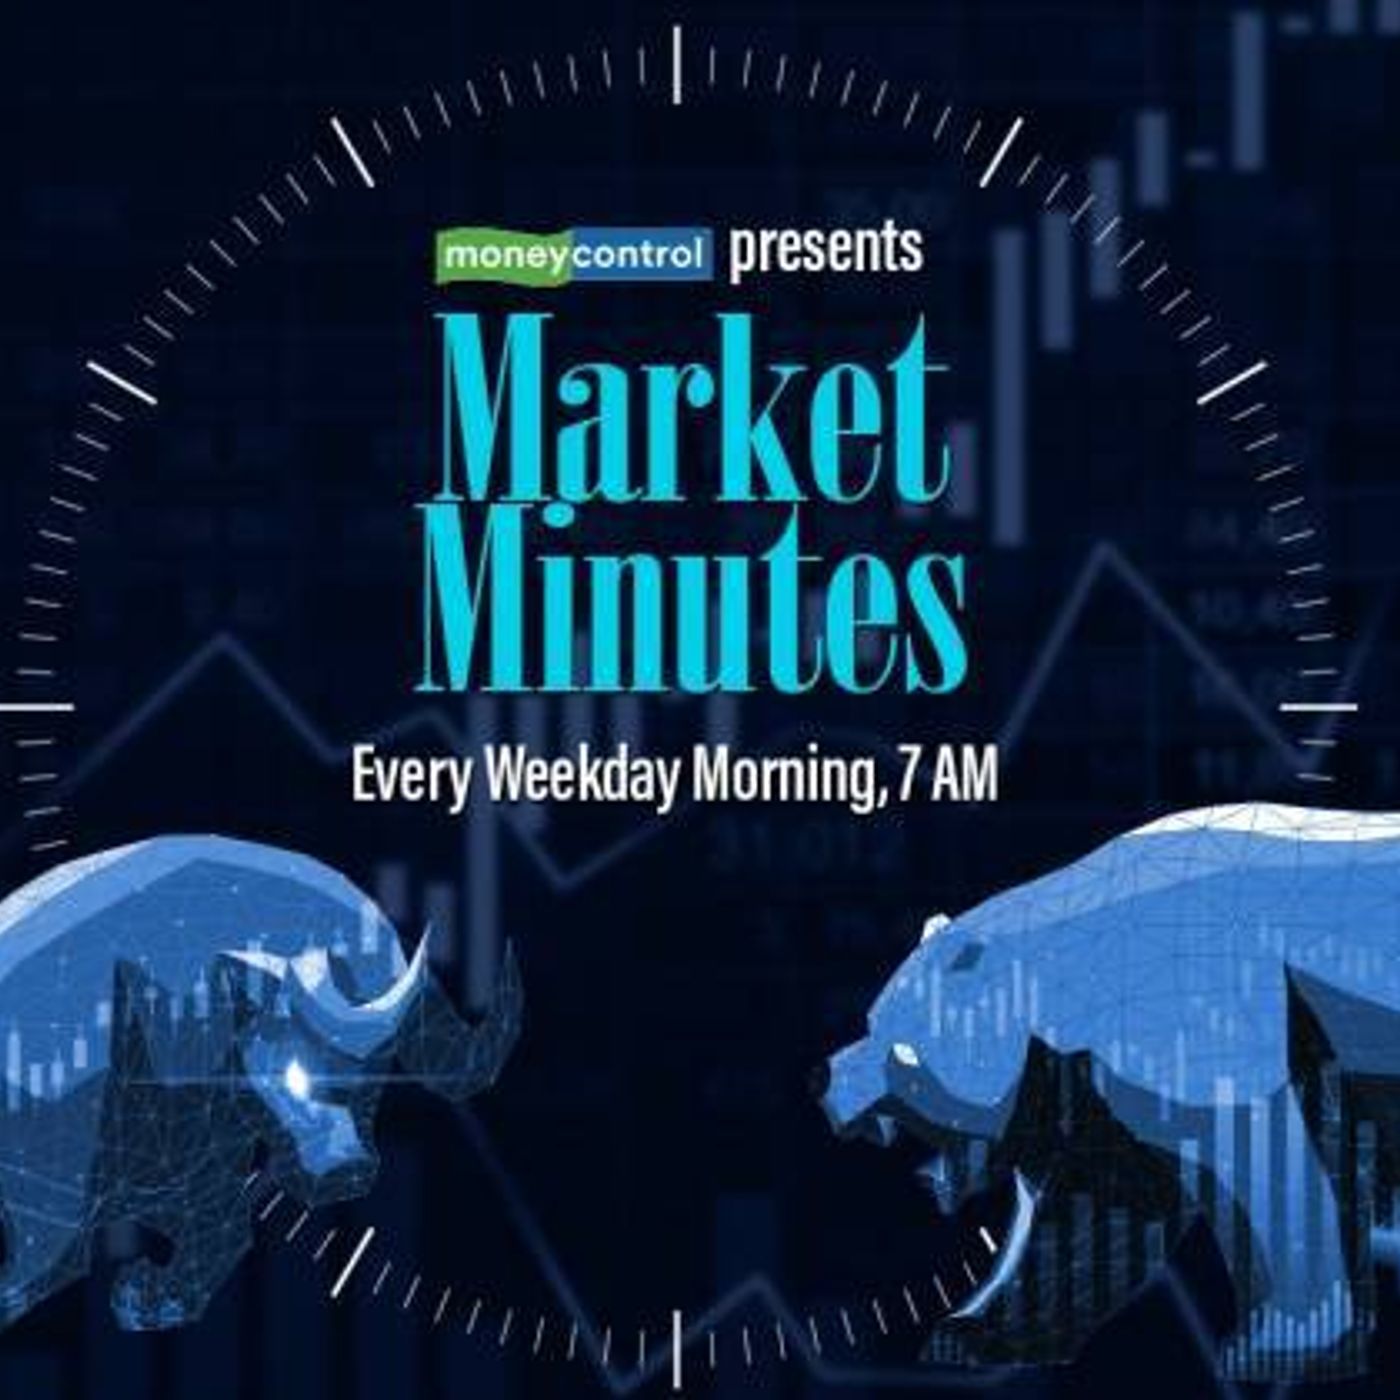 4153: Divi’s Labs, ONGC and NSE’s Q3 show and more | Market Minutes